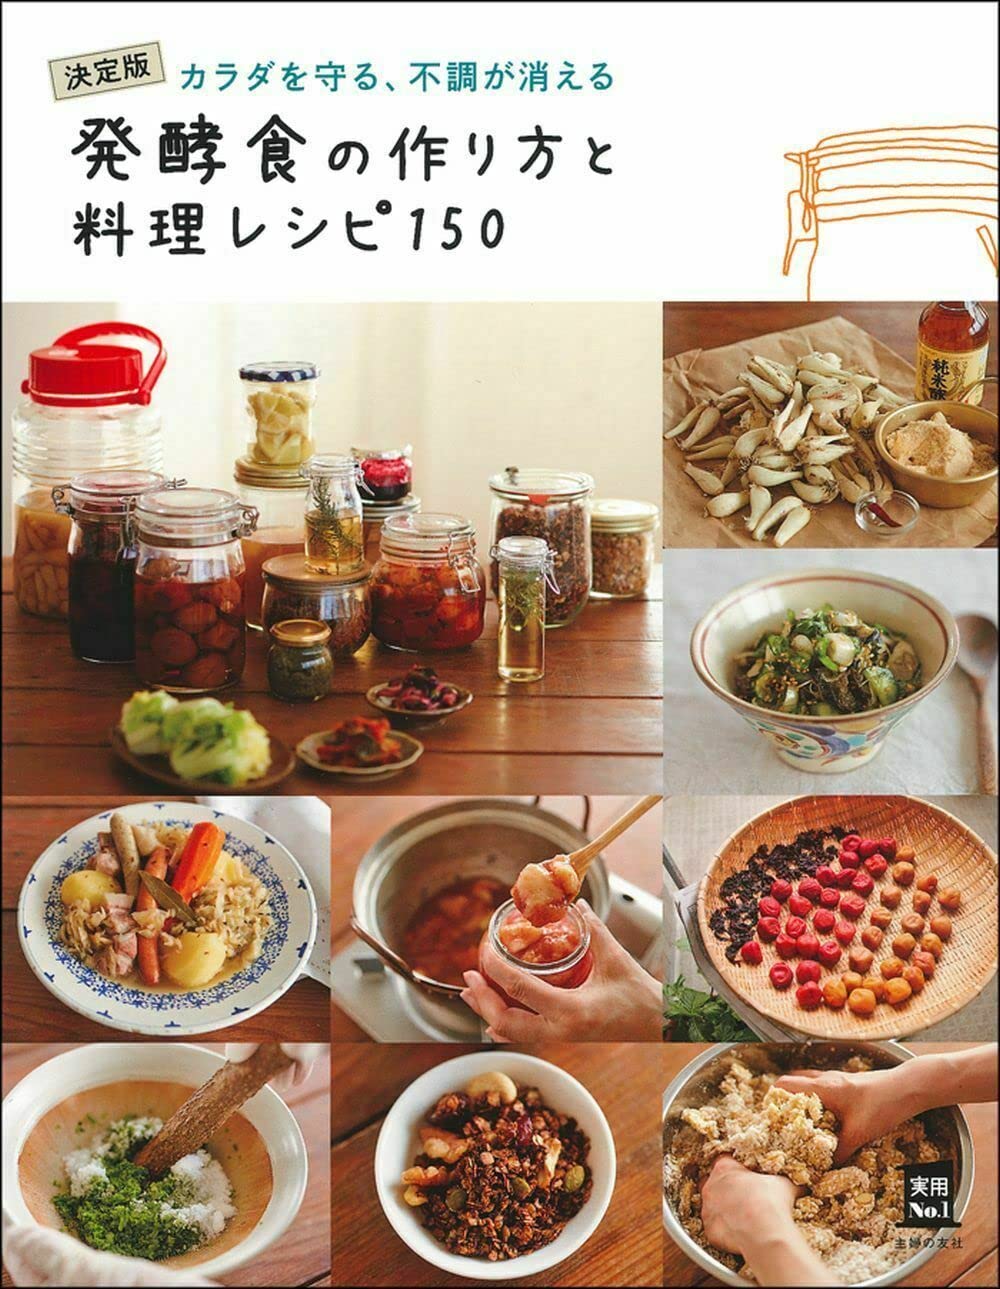  departure . meal. making person . cooking recipe 150 ( practical use No.1)